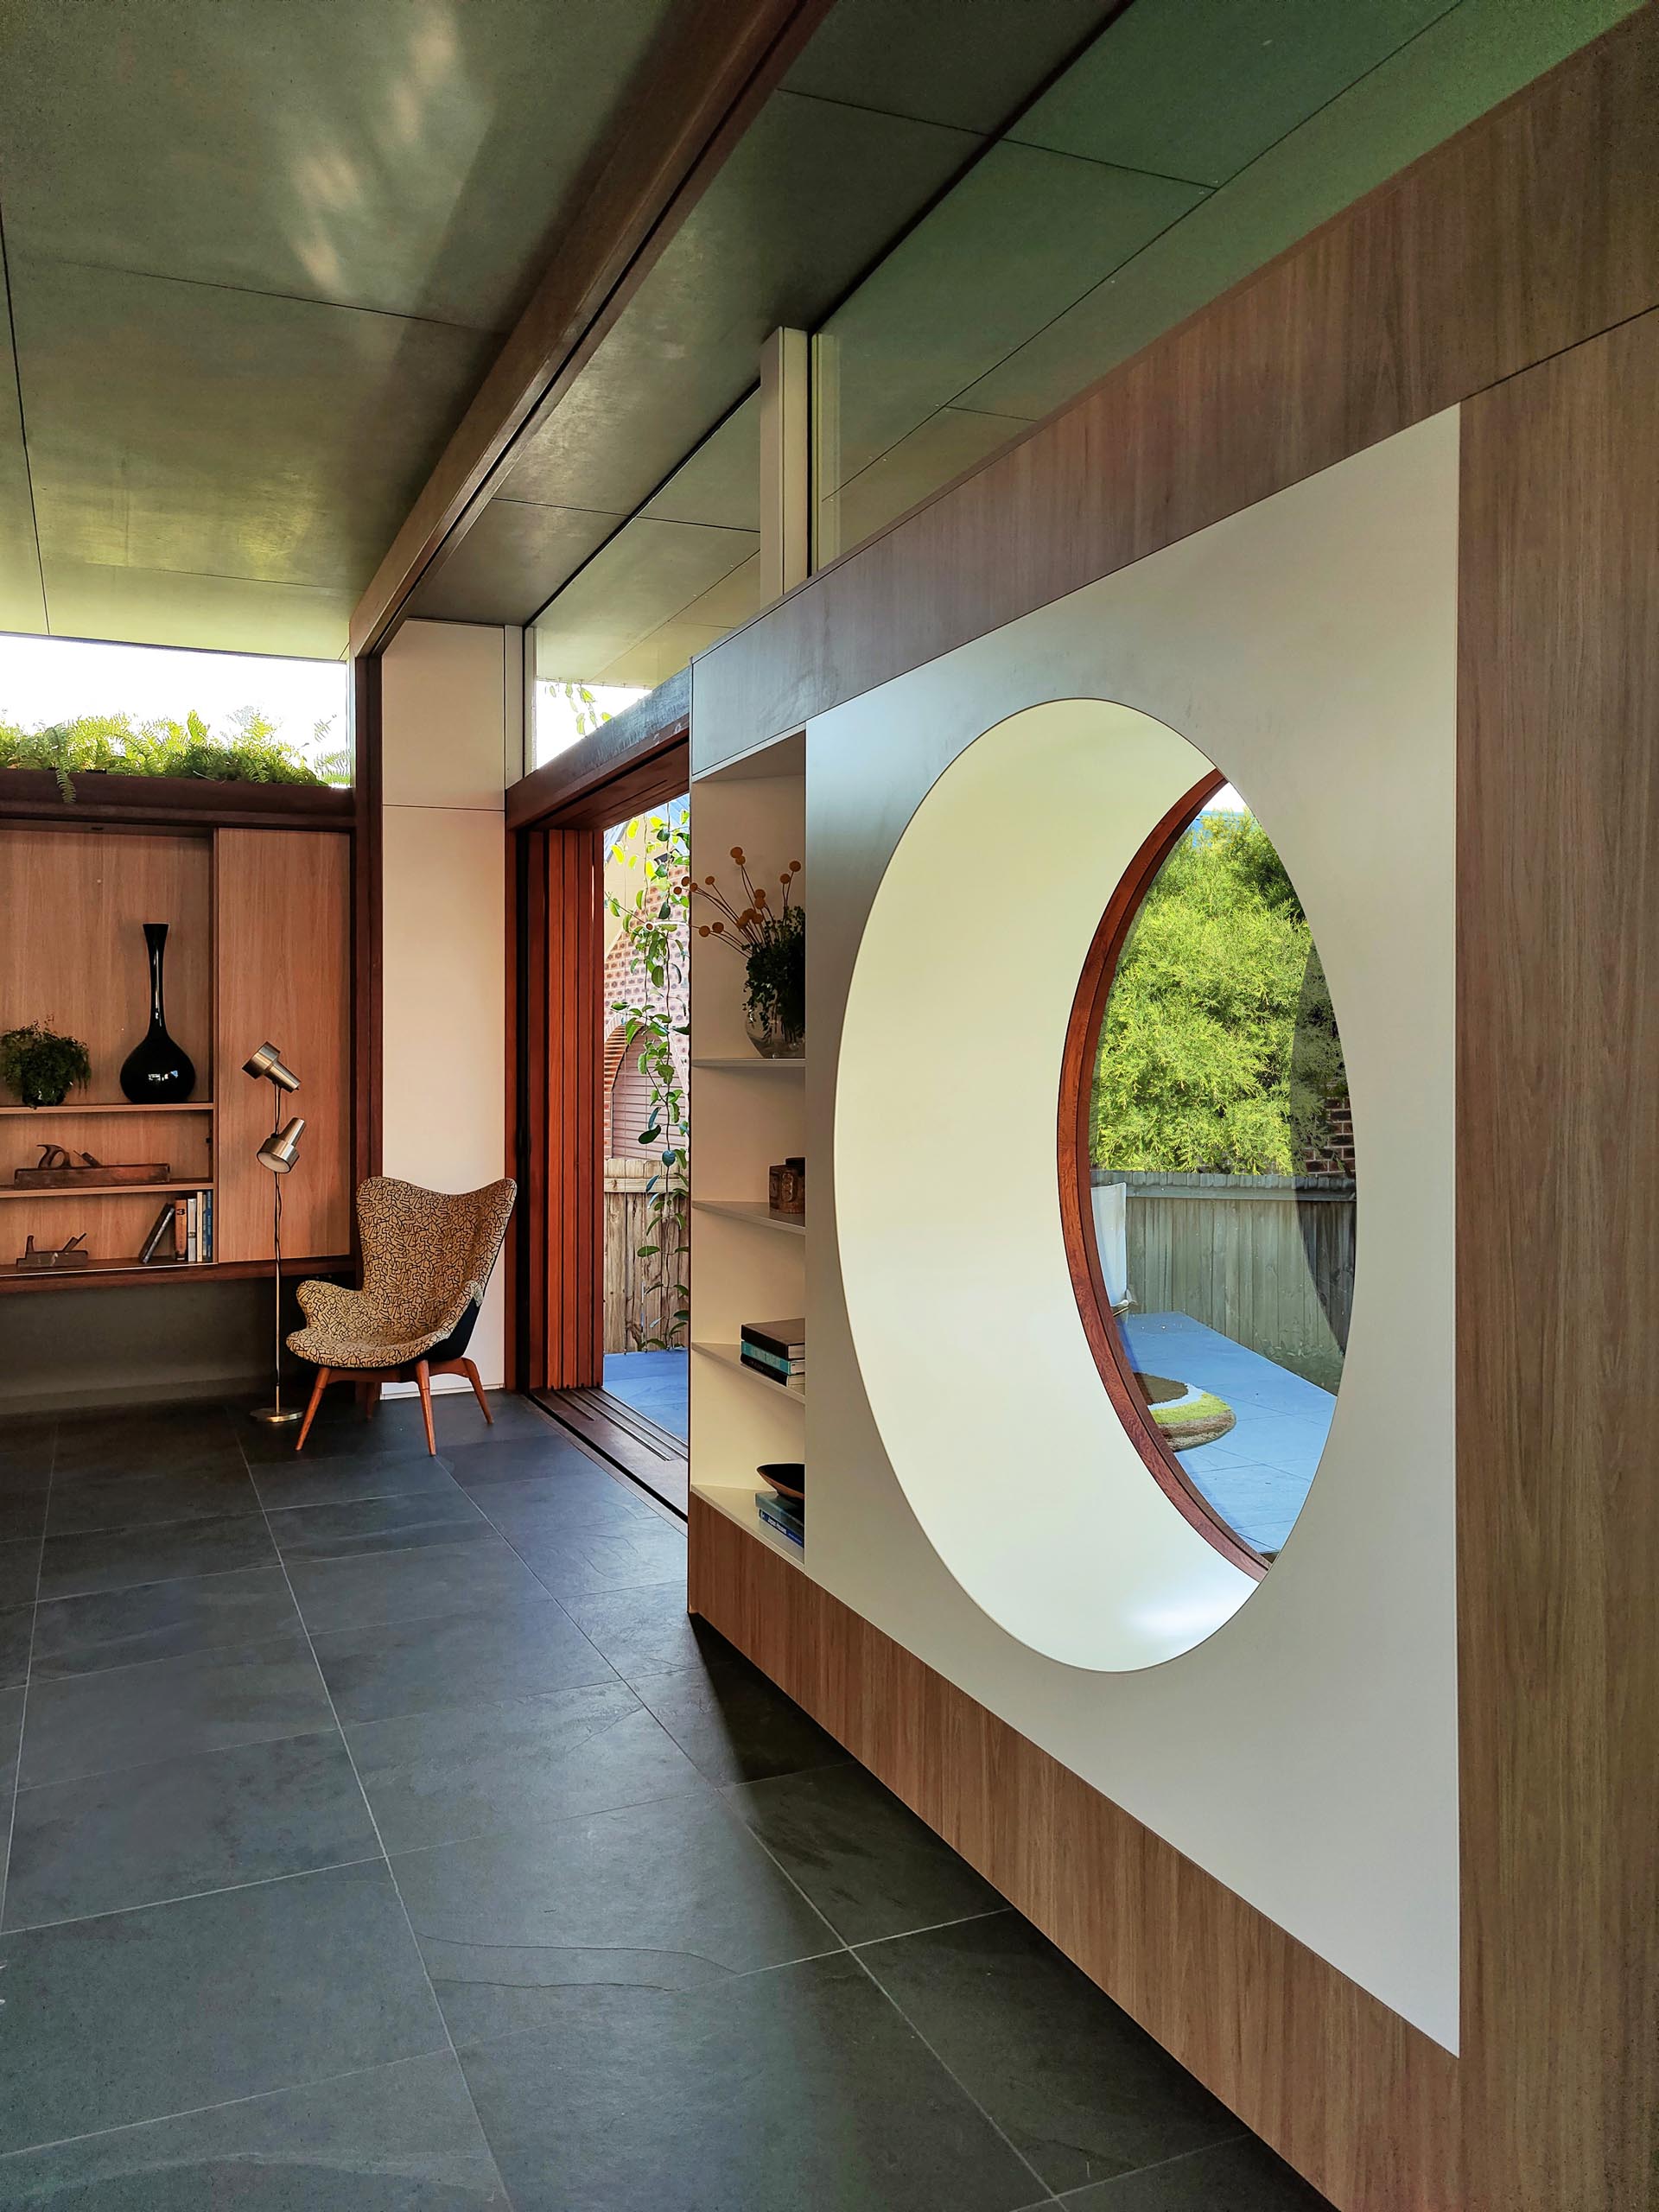 A modern living room with a circular window.